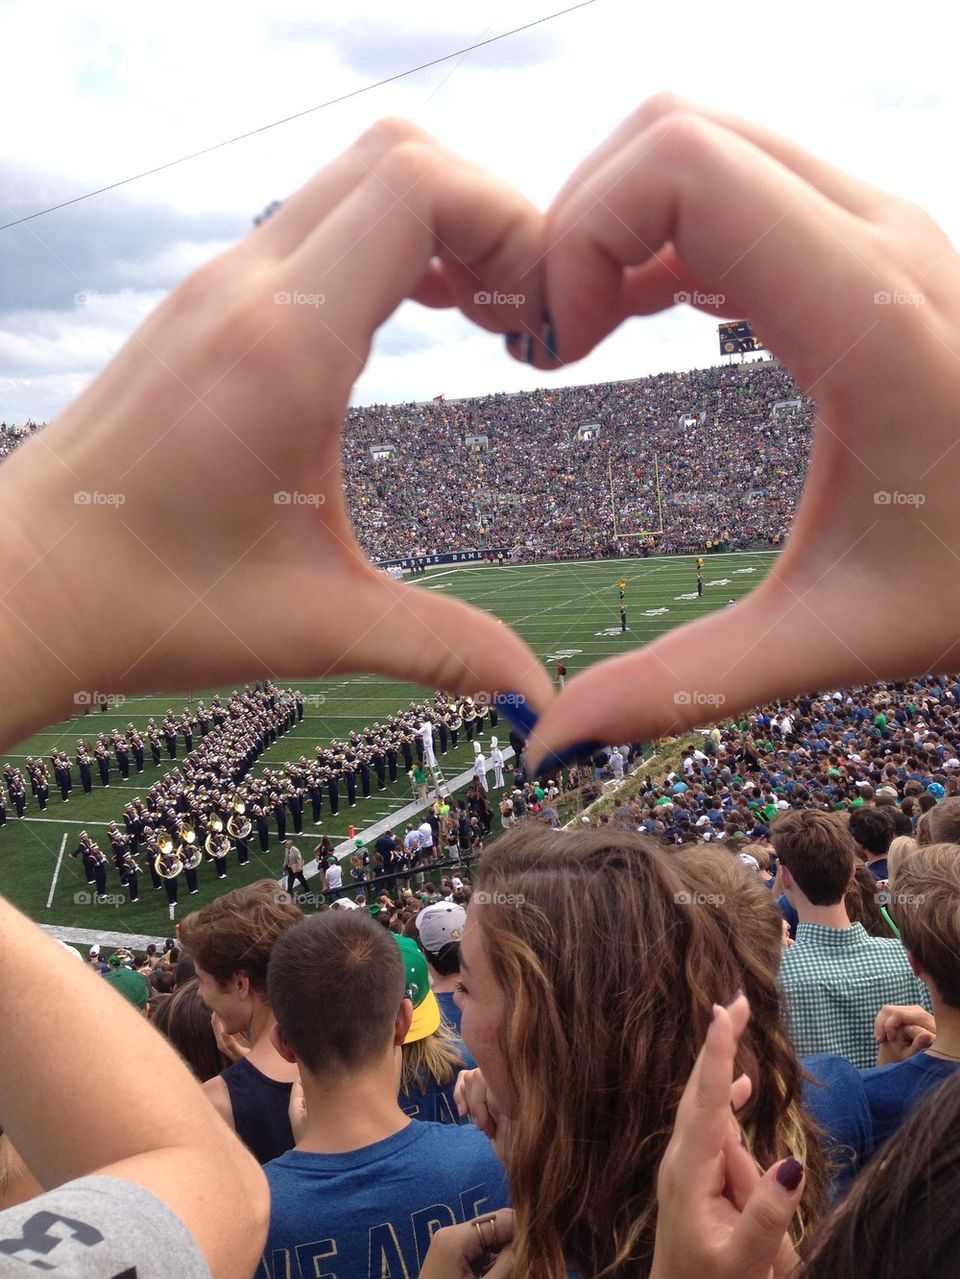 Hearts for Notre Dame